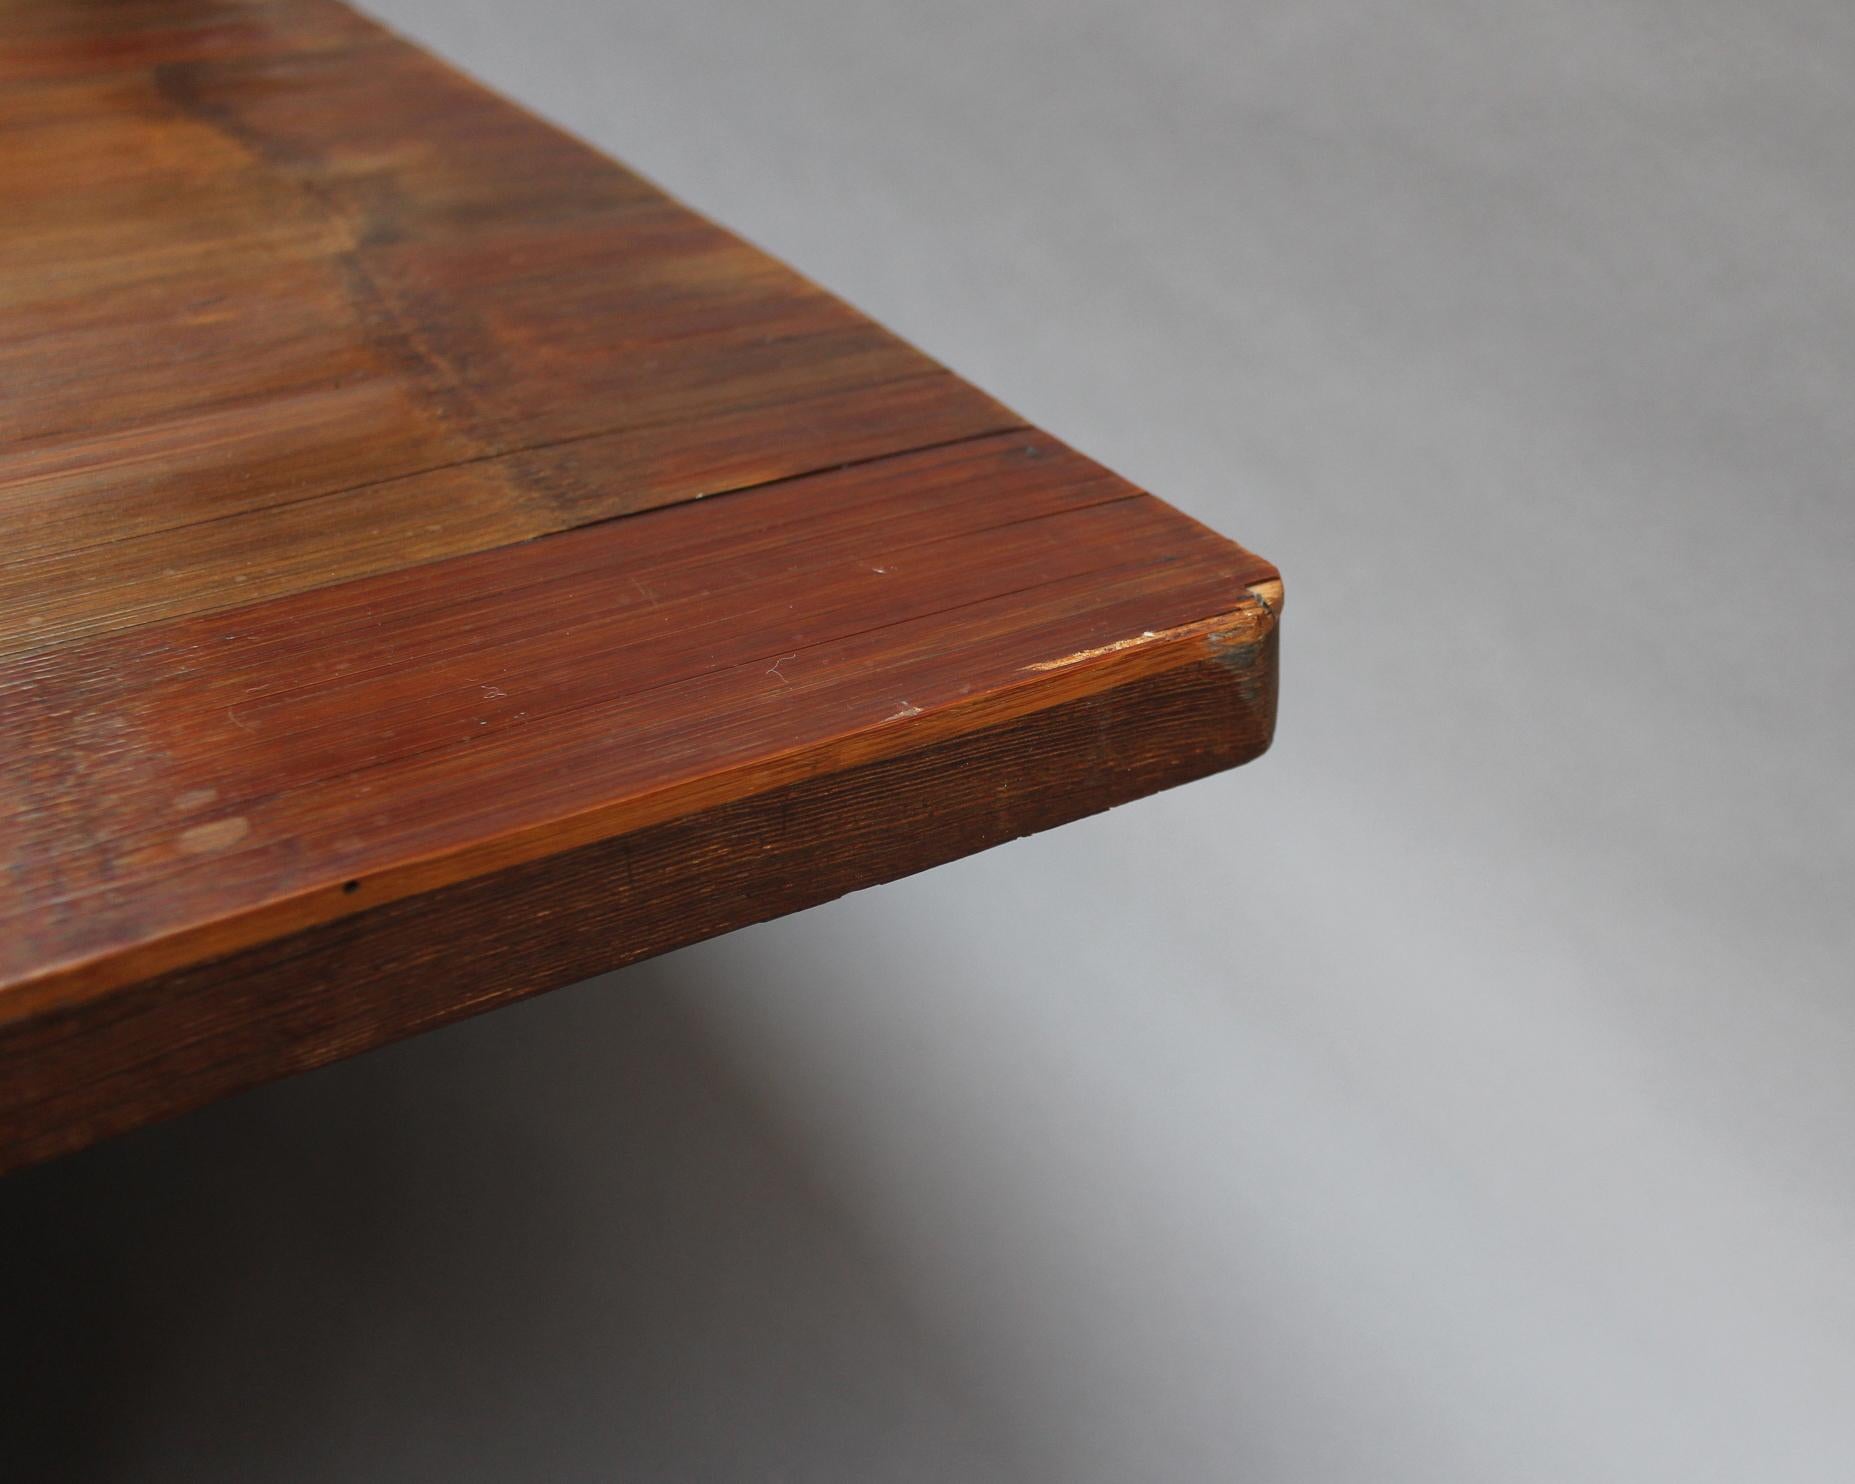 Wenge Axel Vervoordt, Large 1980s Coffee Table with a Bamboo Top in a Japanese Style